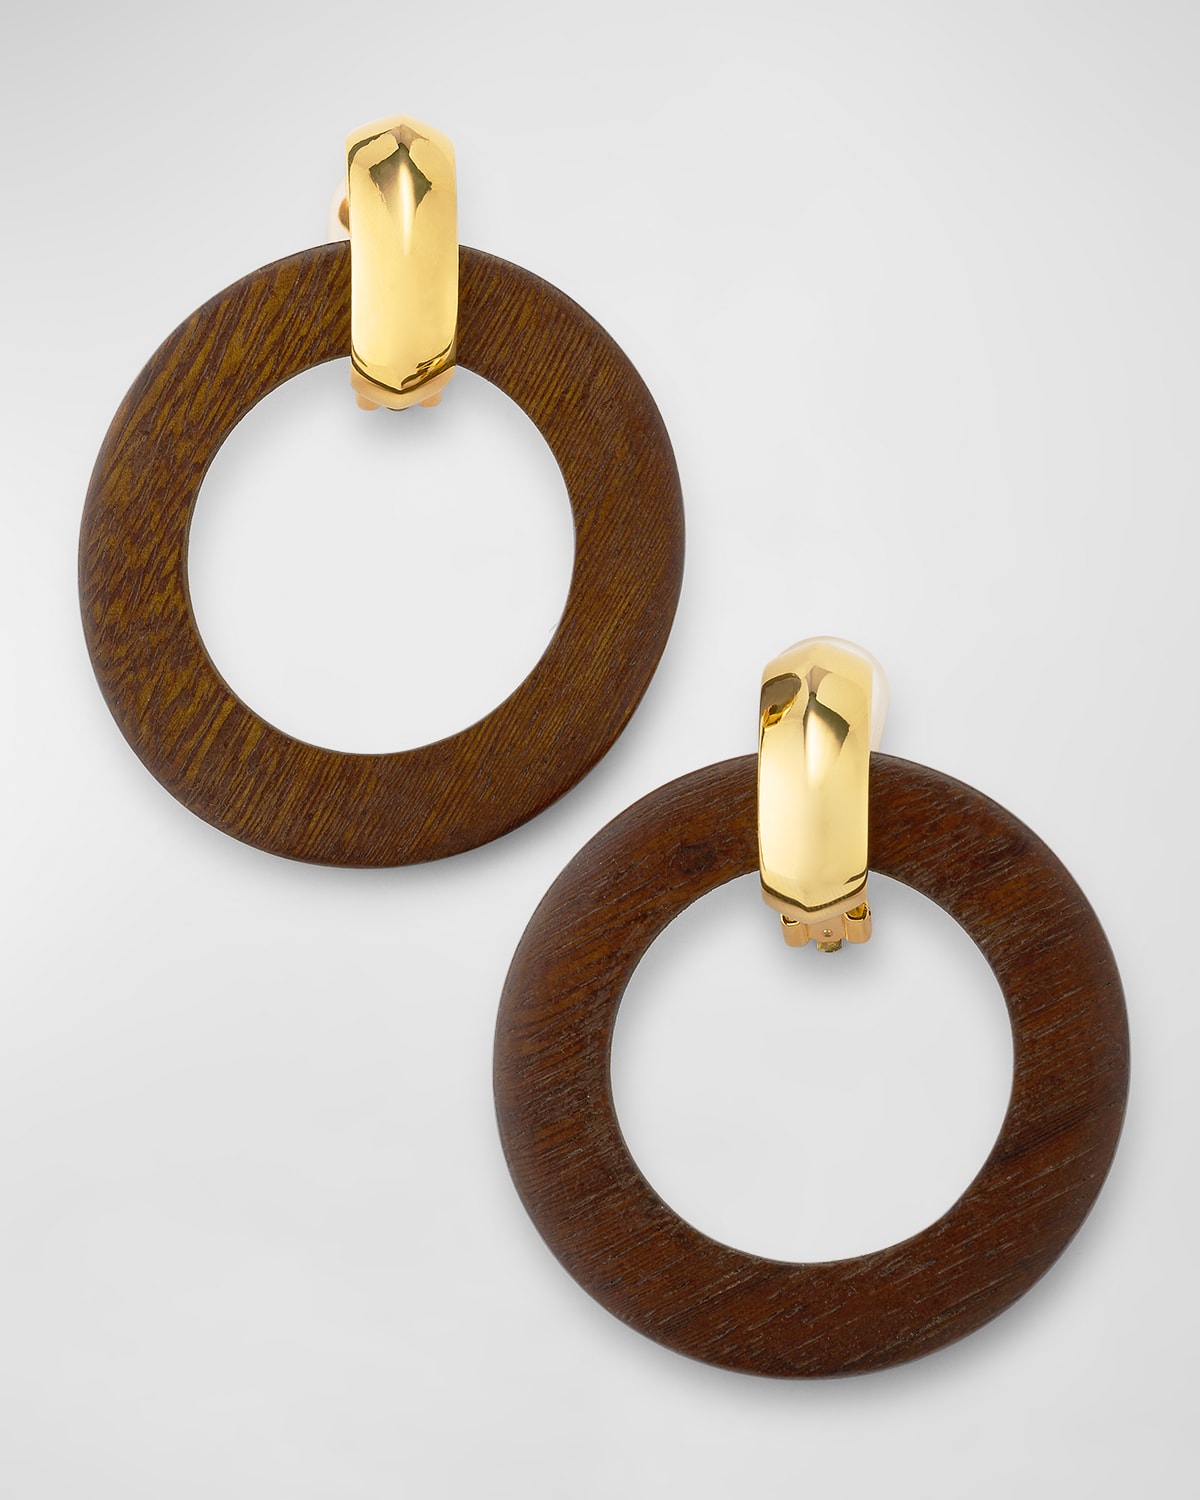 Kenneth Jay Lane Wood Ring Doorknocker Clip Earrings With Polished Top In Brown